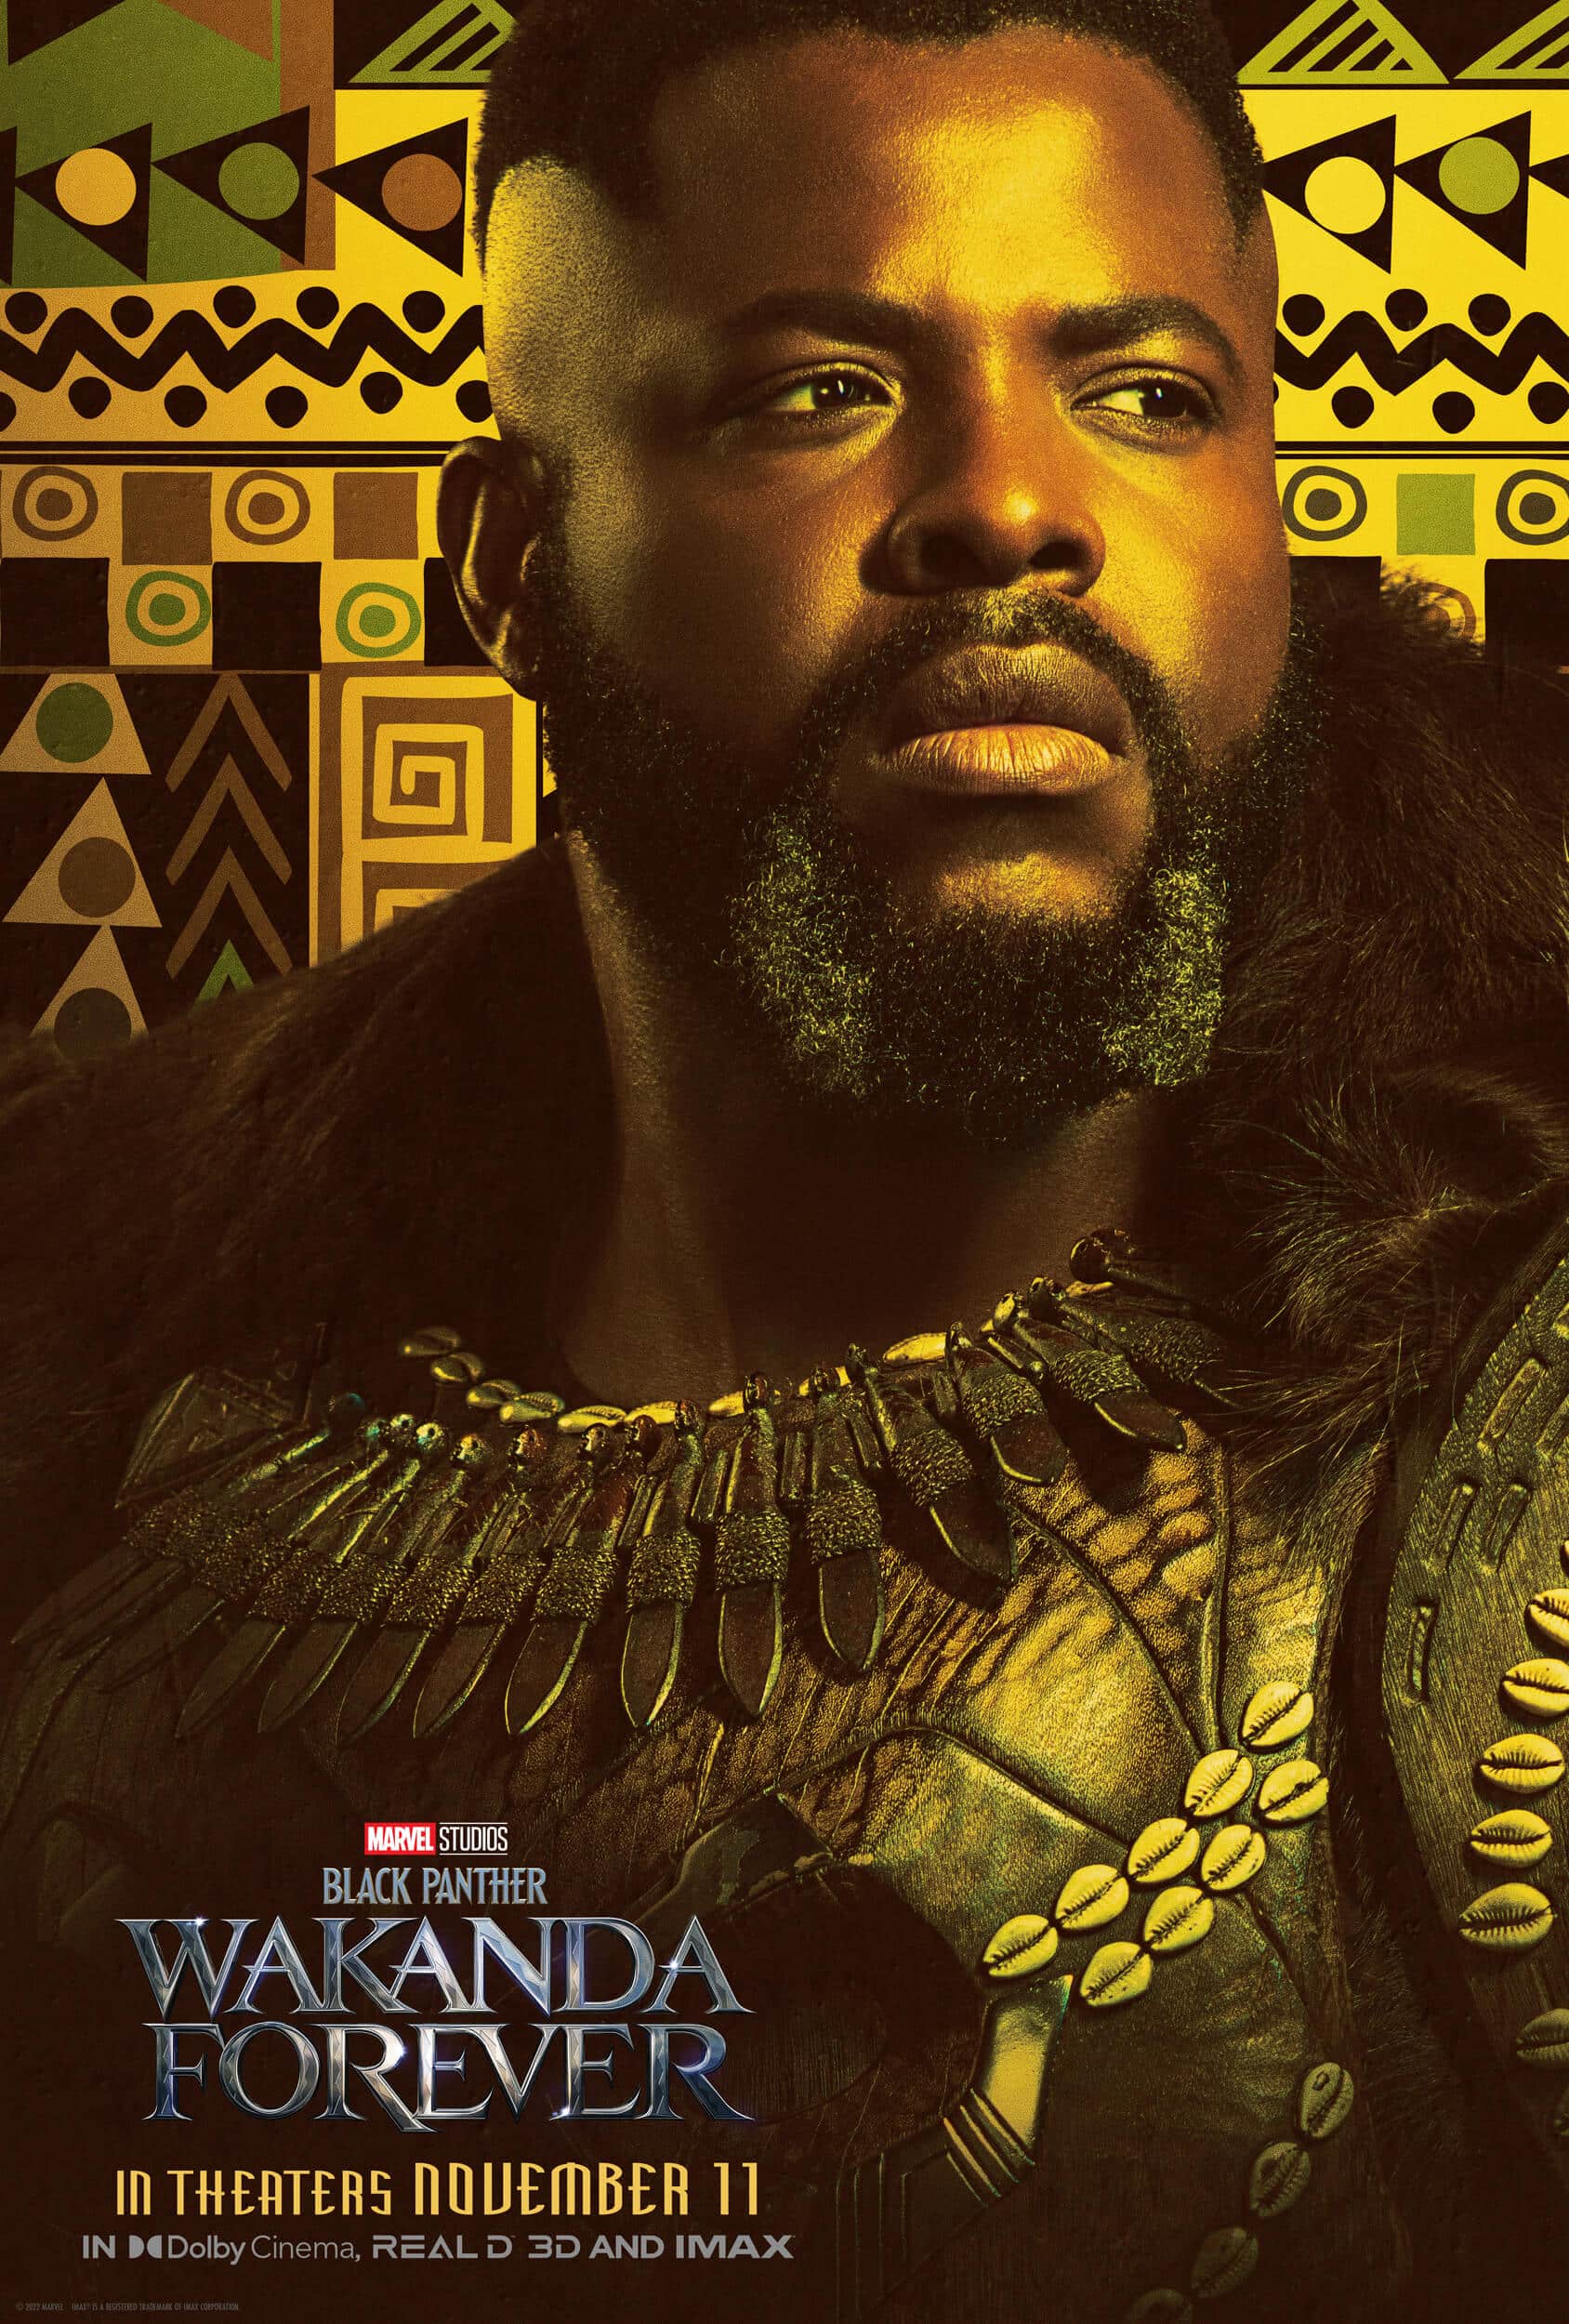 New “Black Panther Wakanda Forever” Trailer & Character Posters